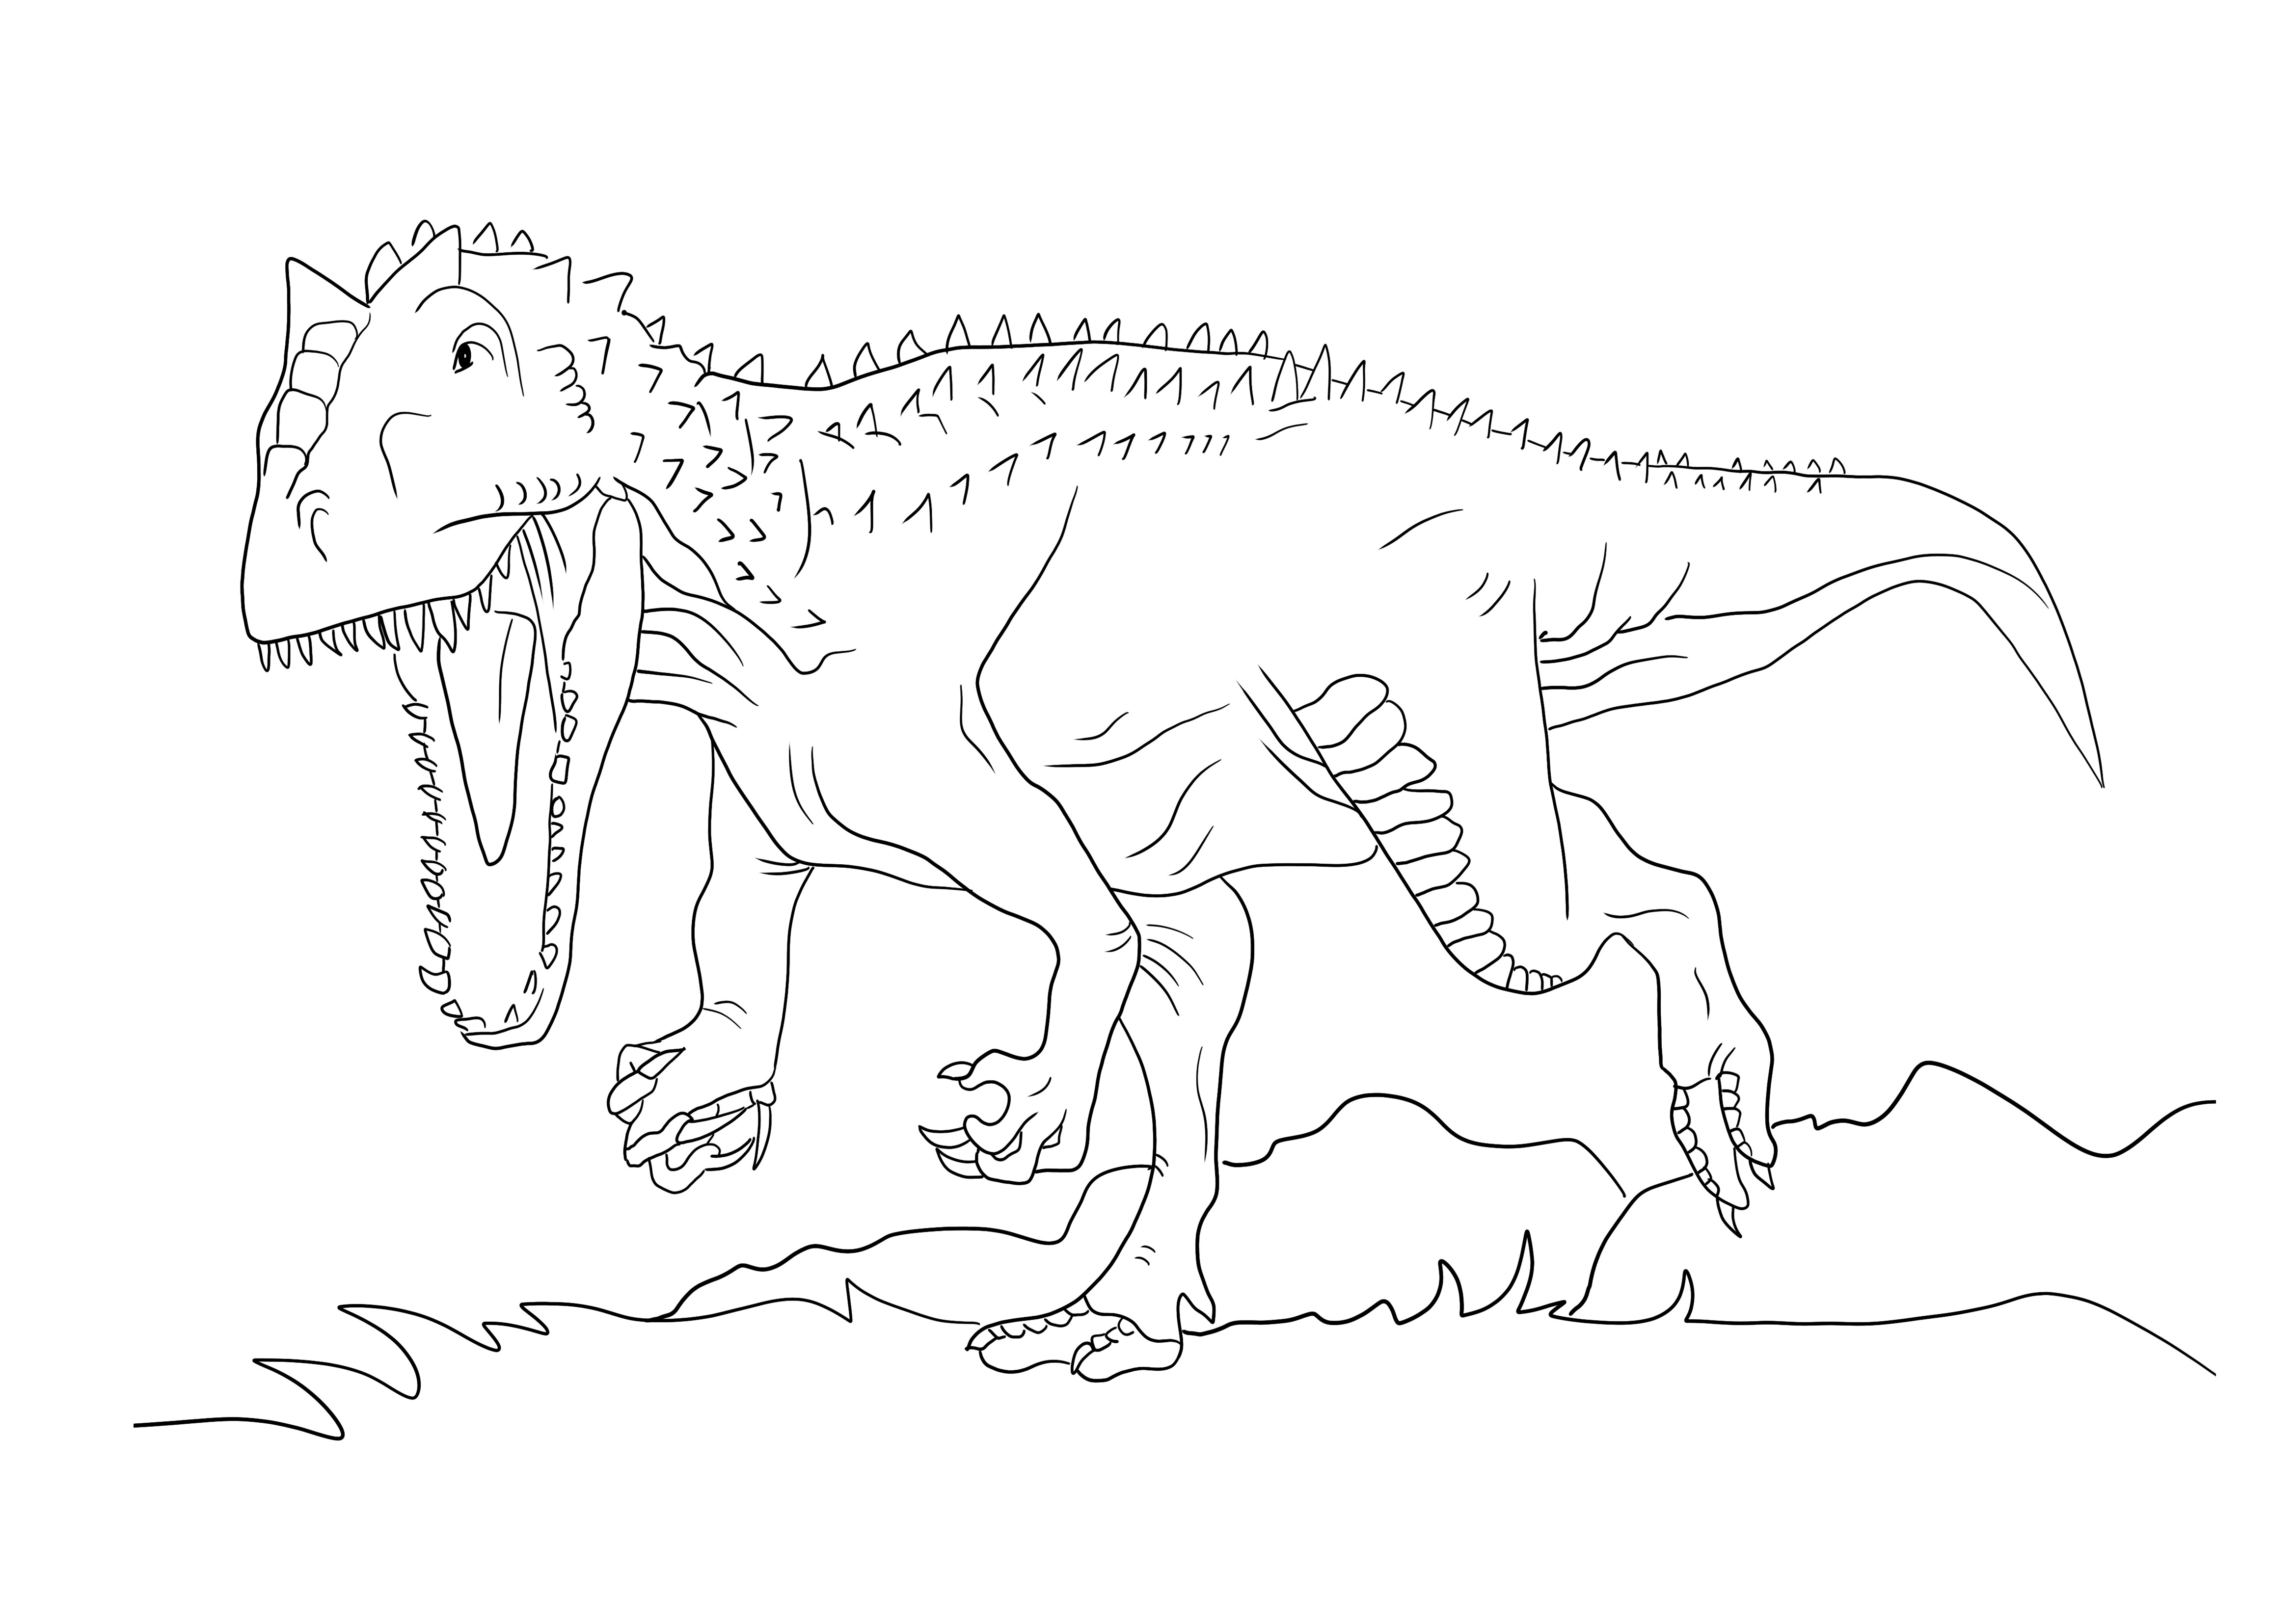 Jurassic park indominus rex free coloring page to print and download